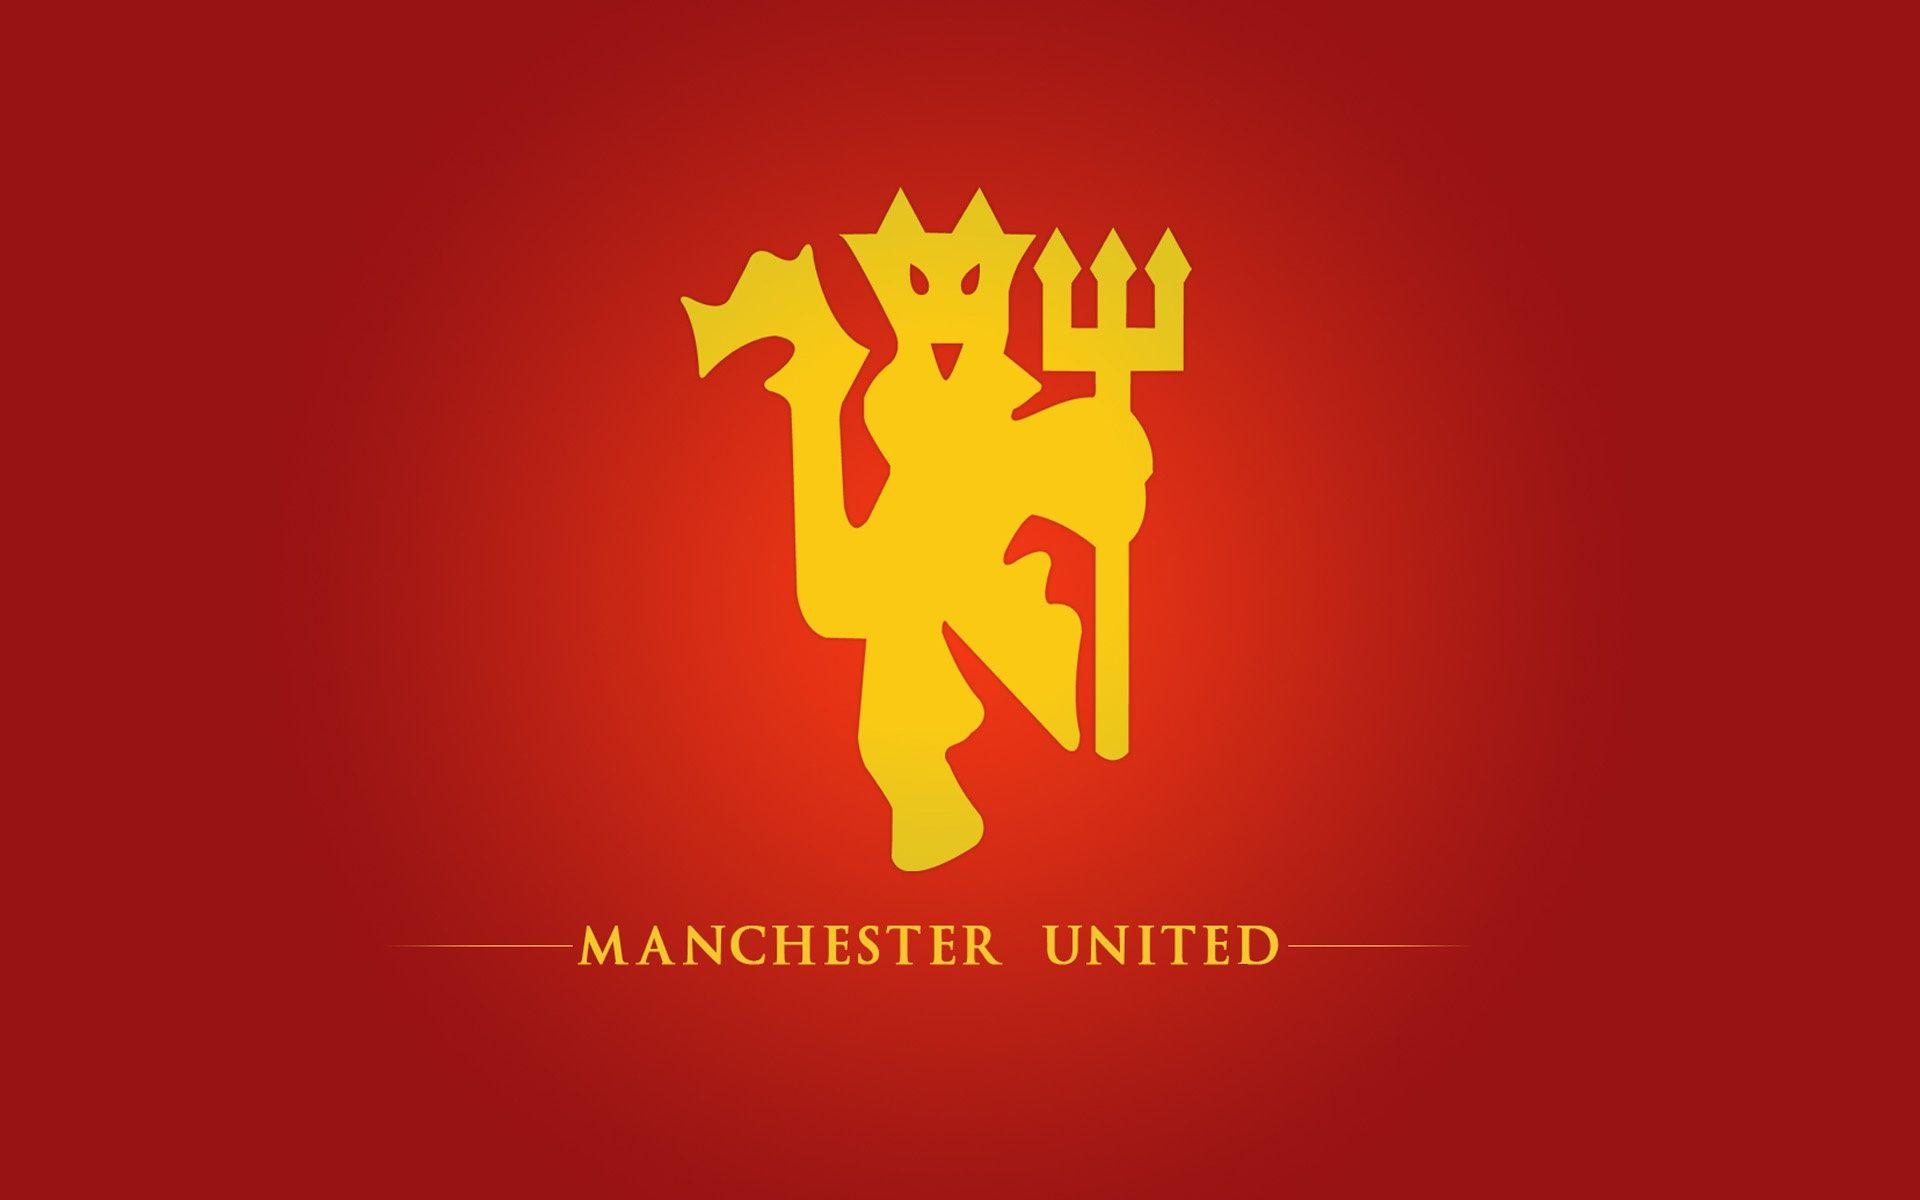 Related Picture Manu Manchester United 04 Wallpaper For 480x800